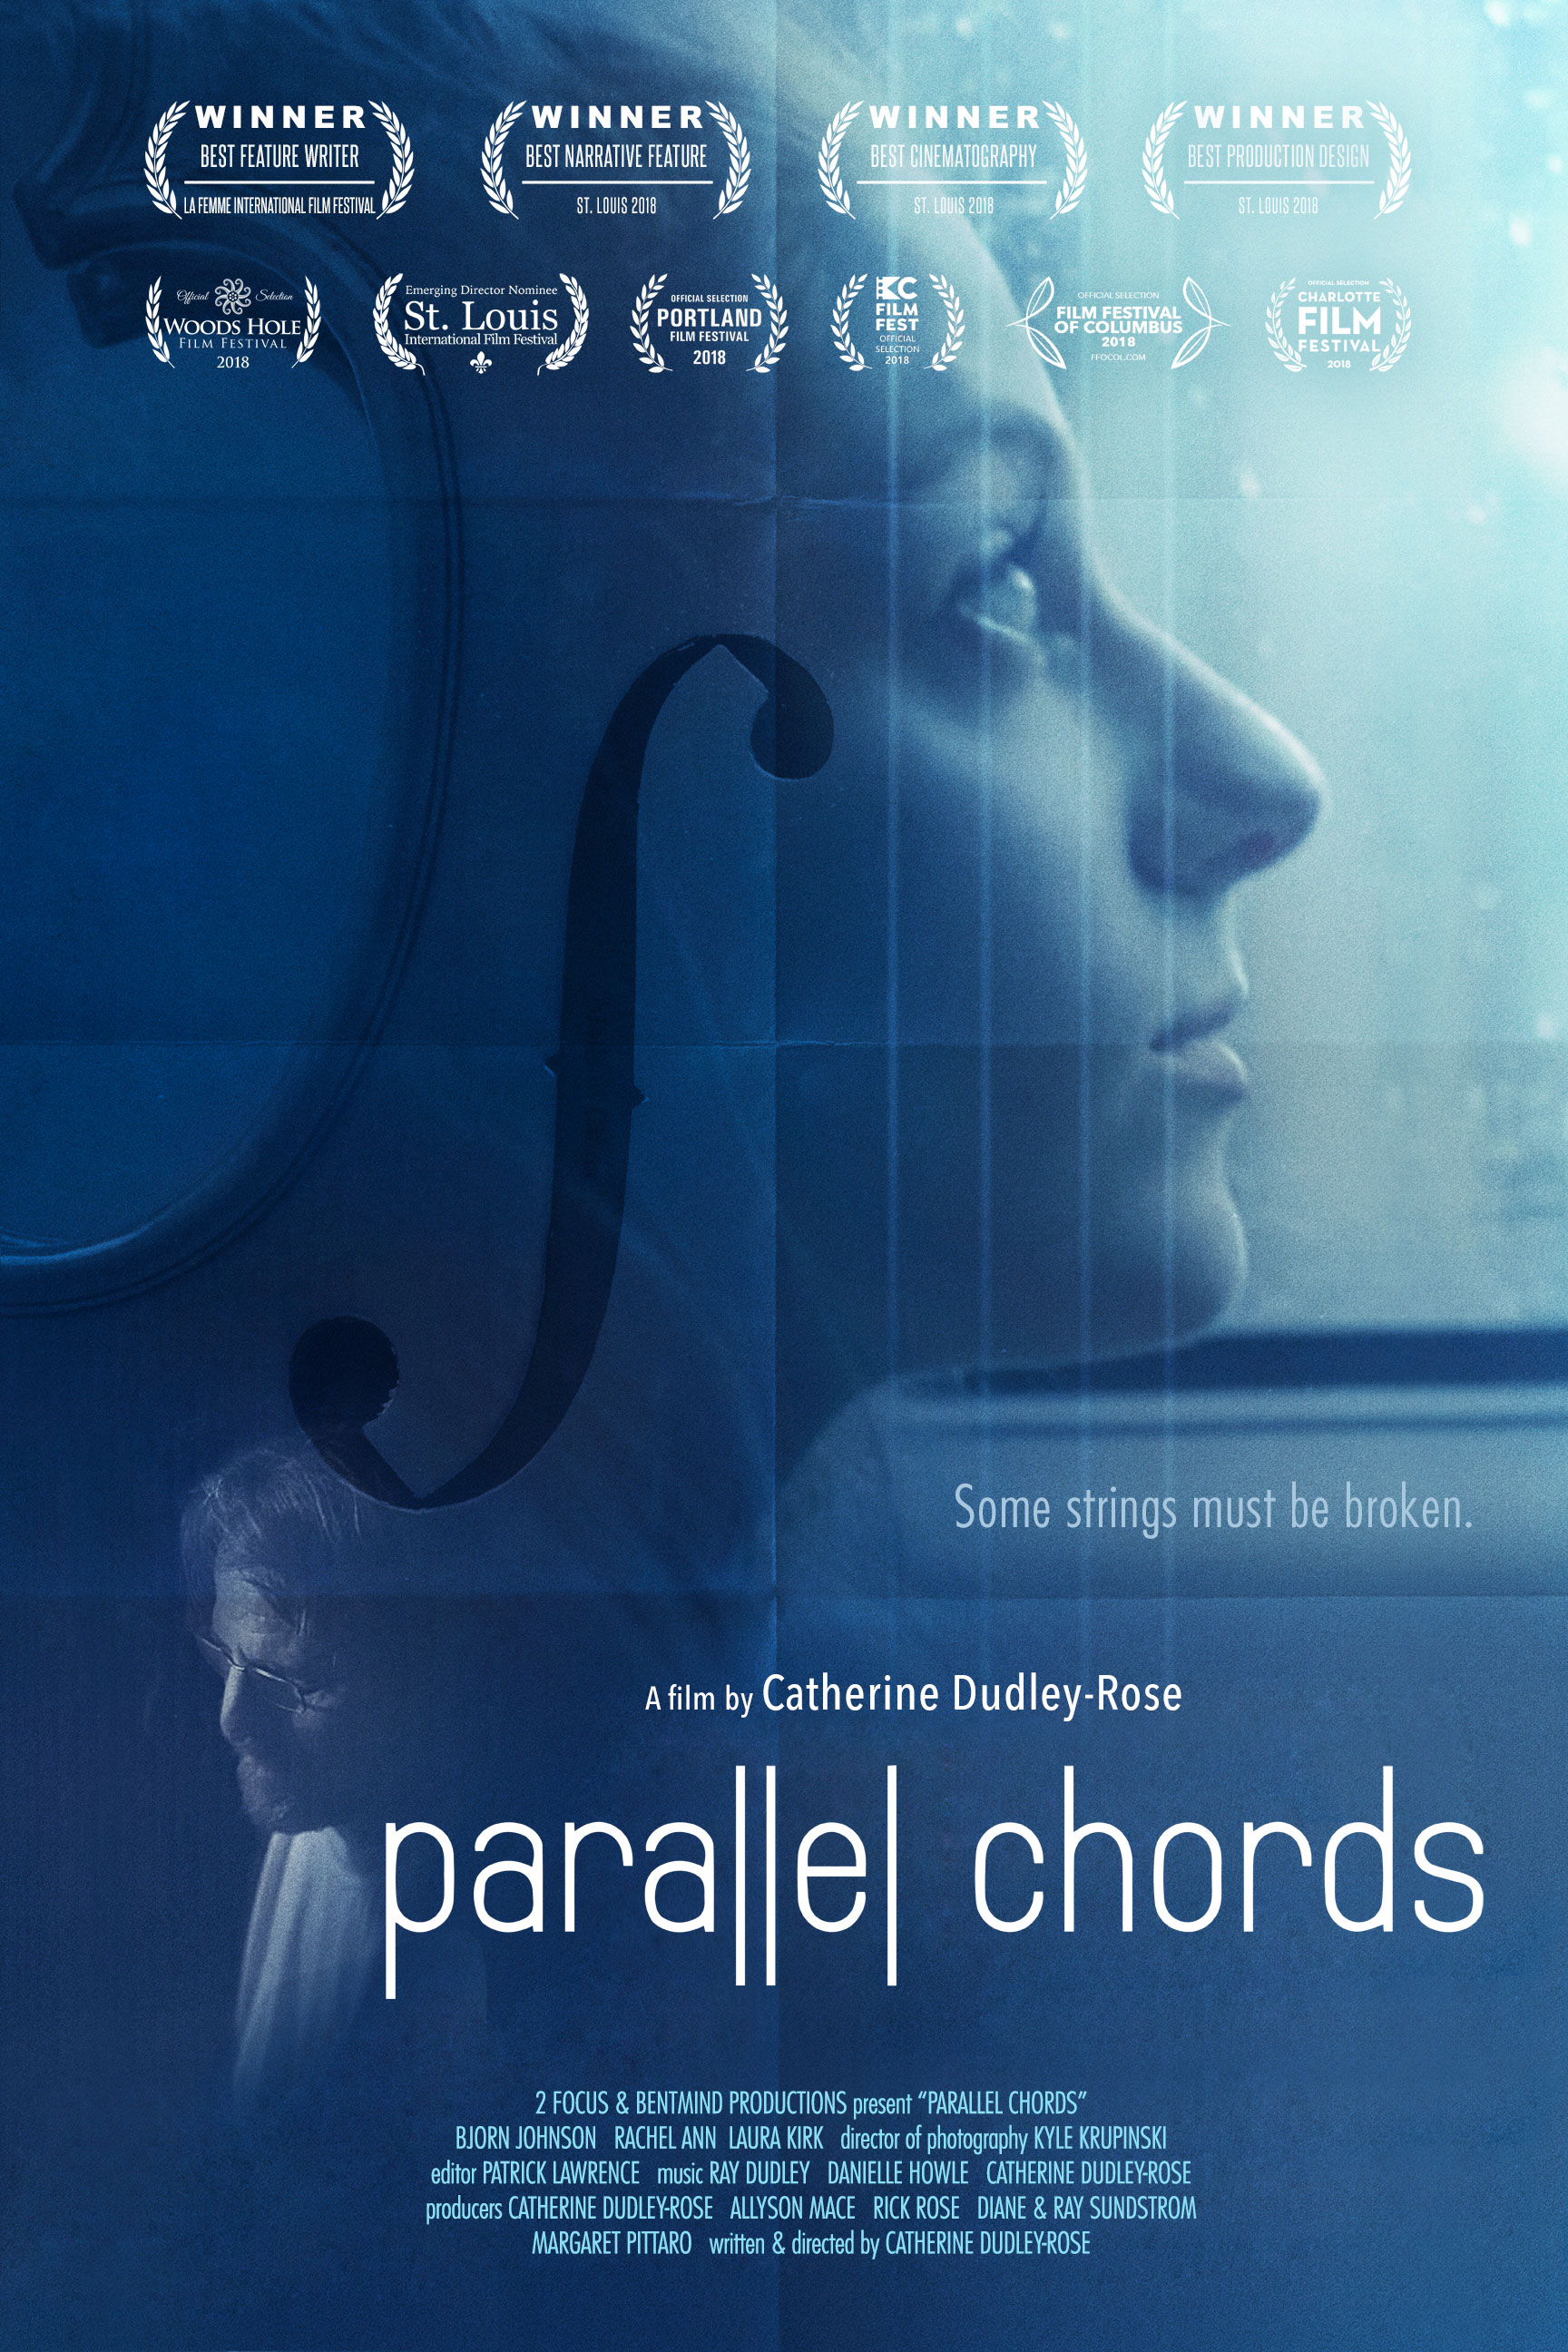 Parallel Chords (Overture) (2015)